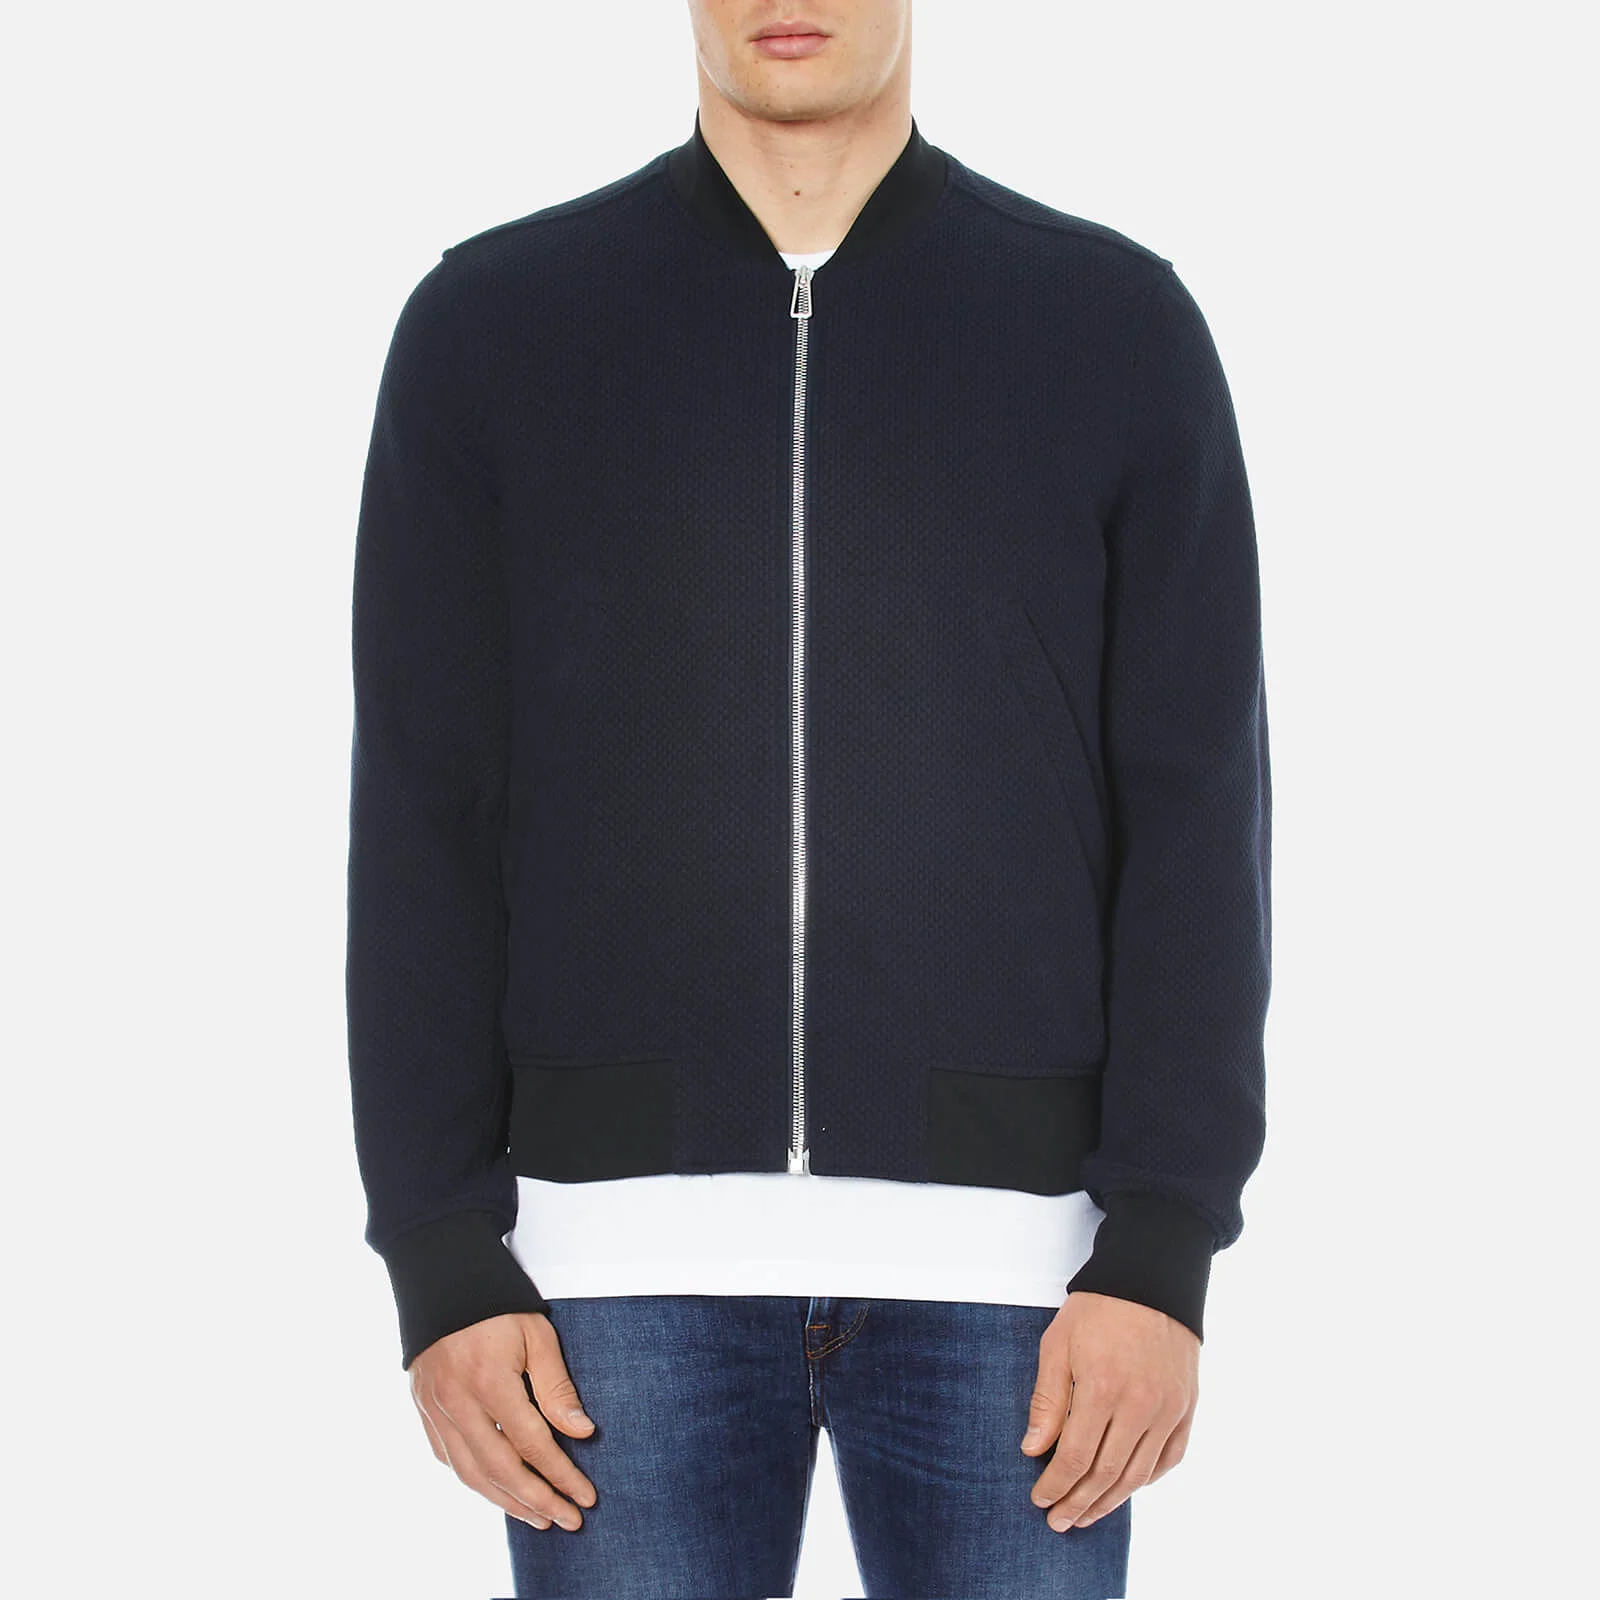 PS by Paul Smith Men's Textured Bomber Jacket - Navy Image 1